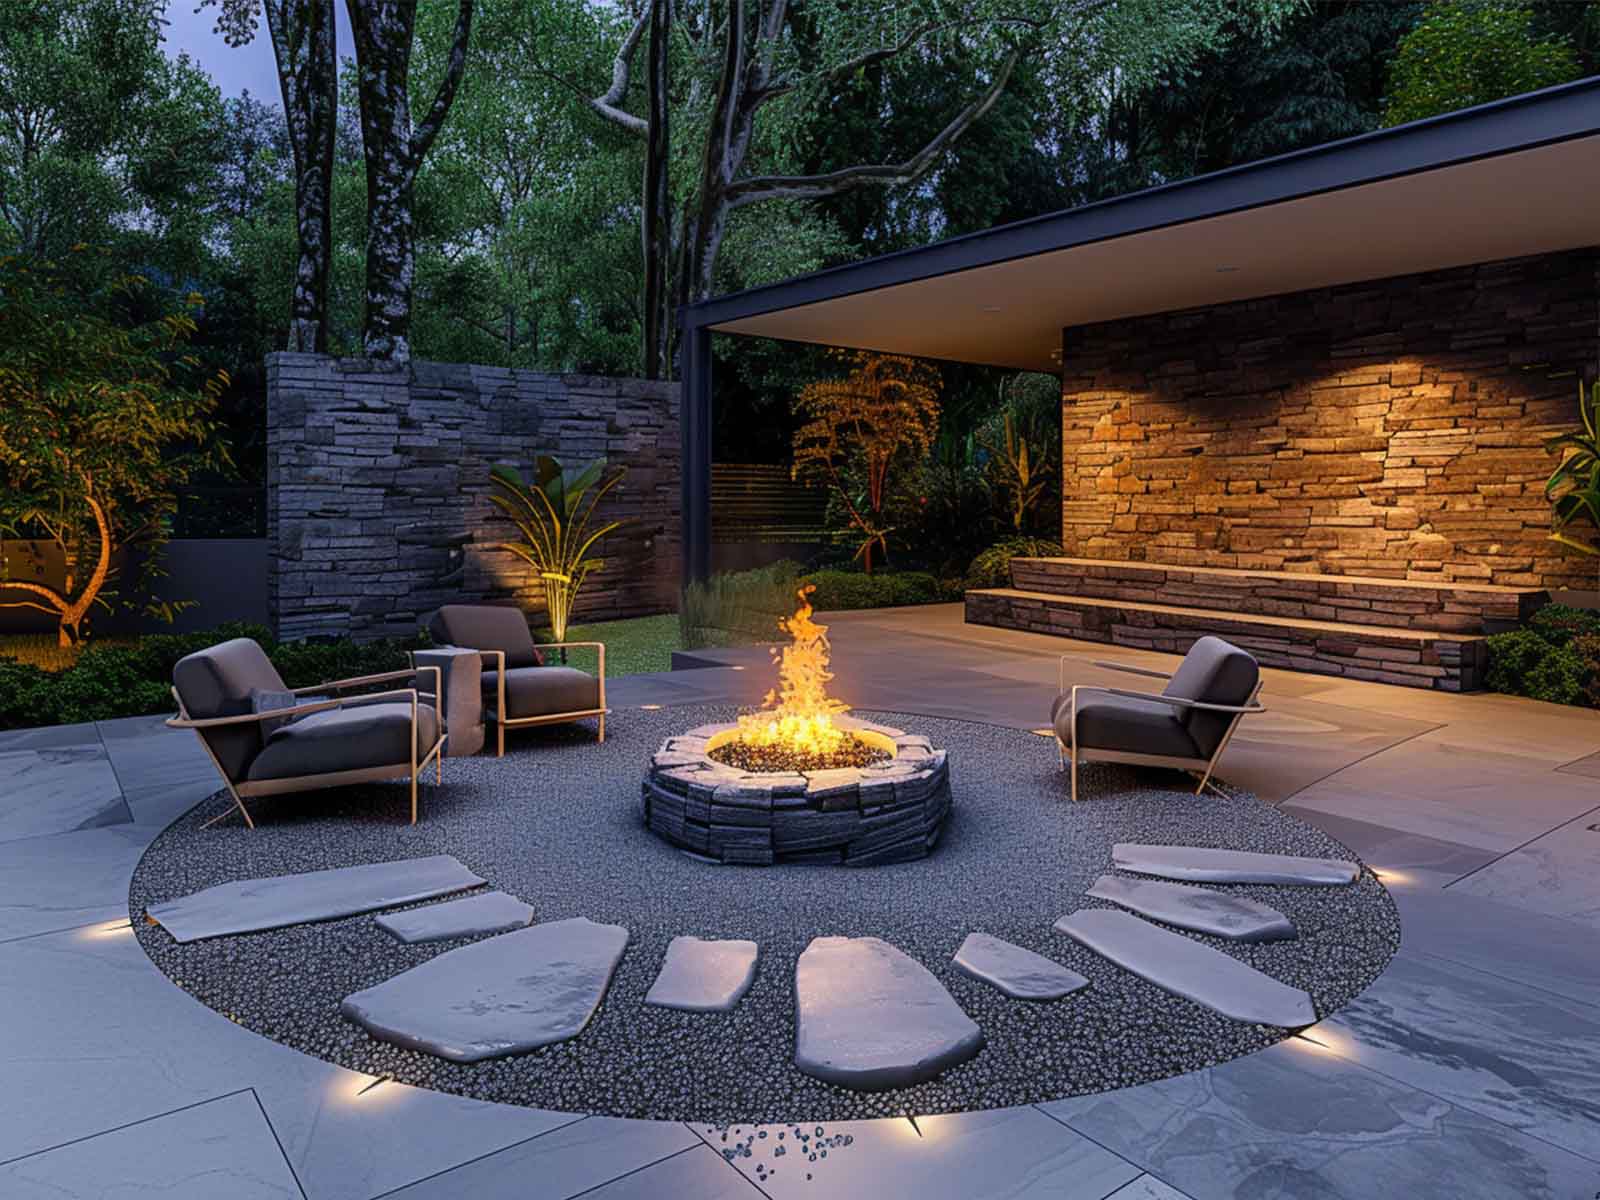 A fire pit seating area illuminated with well lights